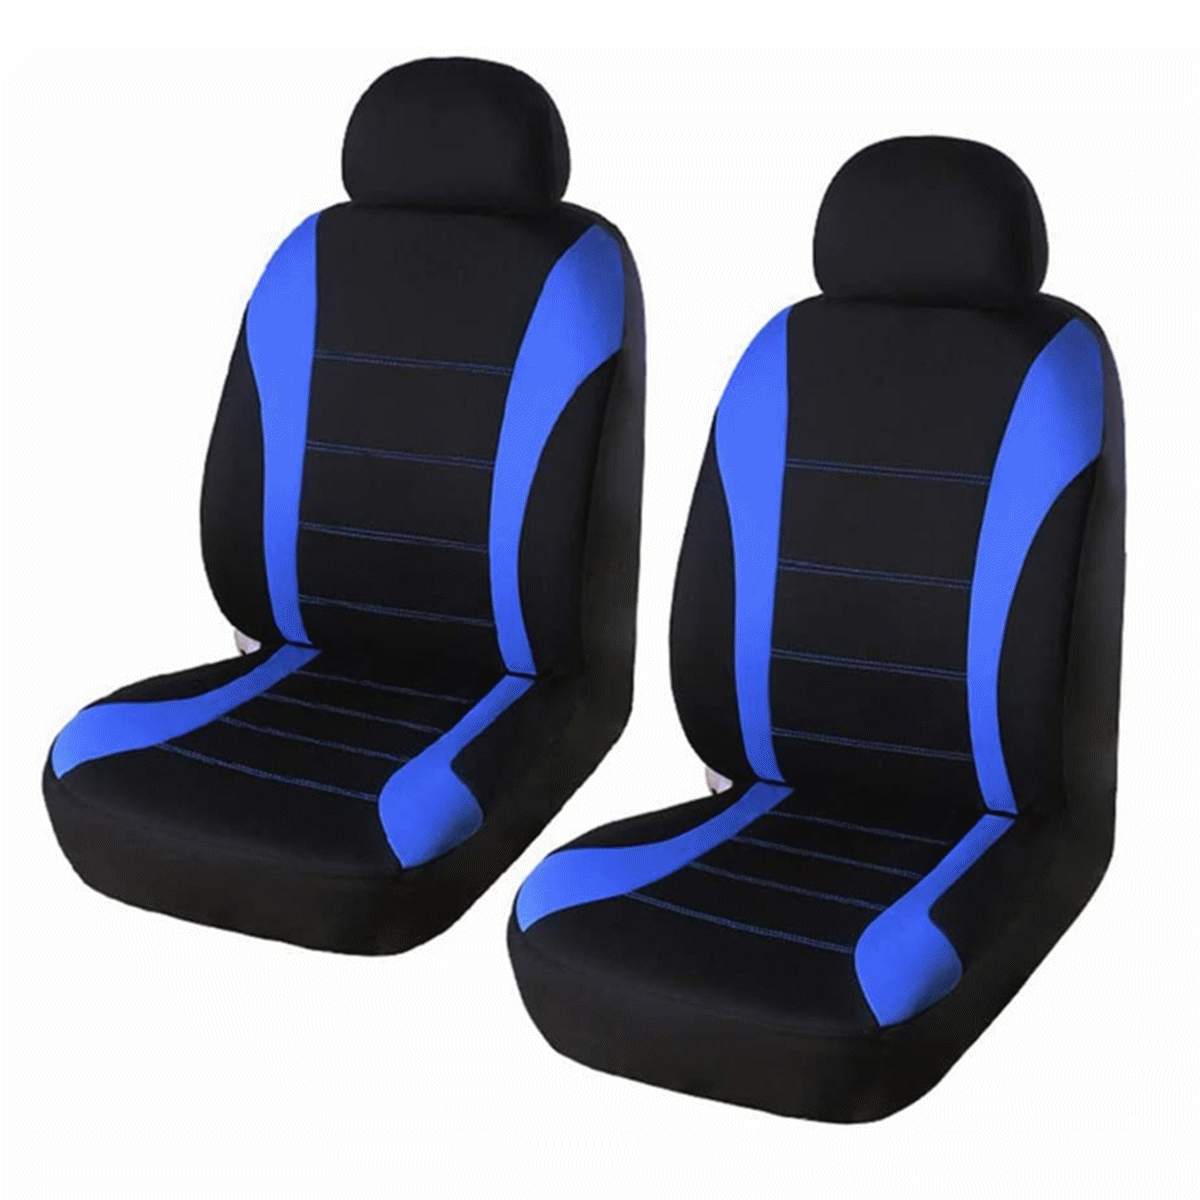 Waterproof Faux Leather Seat Cushion Anti-Slip Car Seat Protector Universal for 95% Cars SUVs Black Back Row Car Seat Covers Rear Back Row Split Bench Protection 